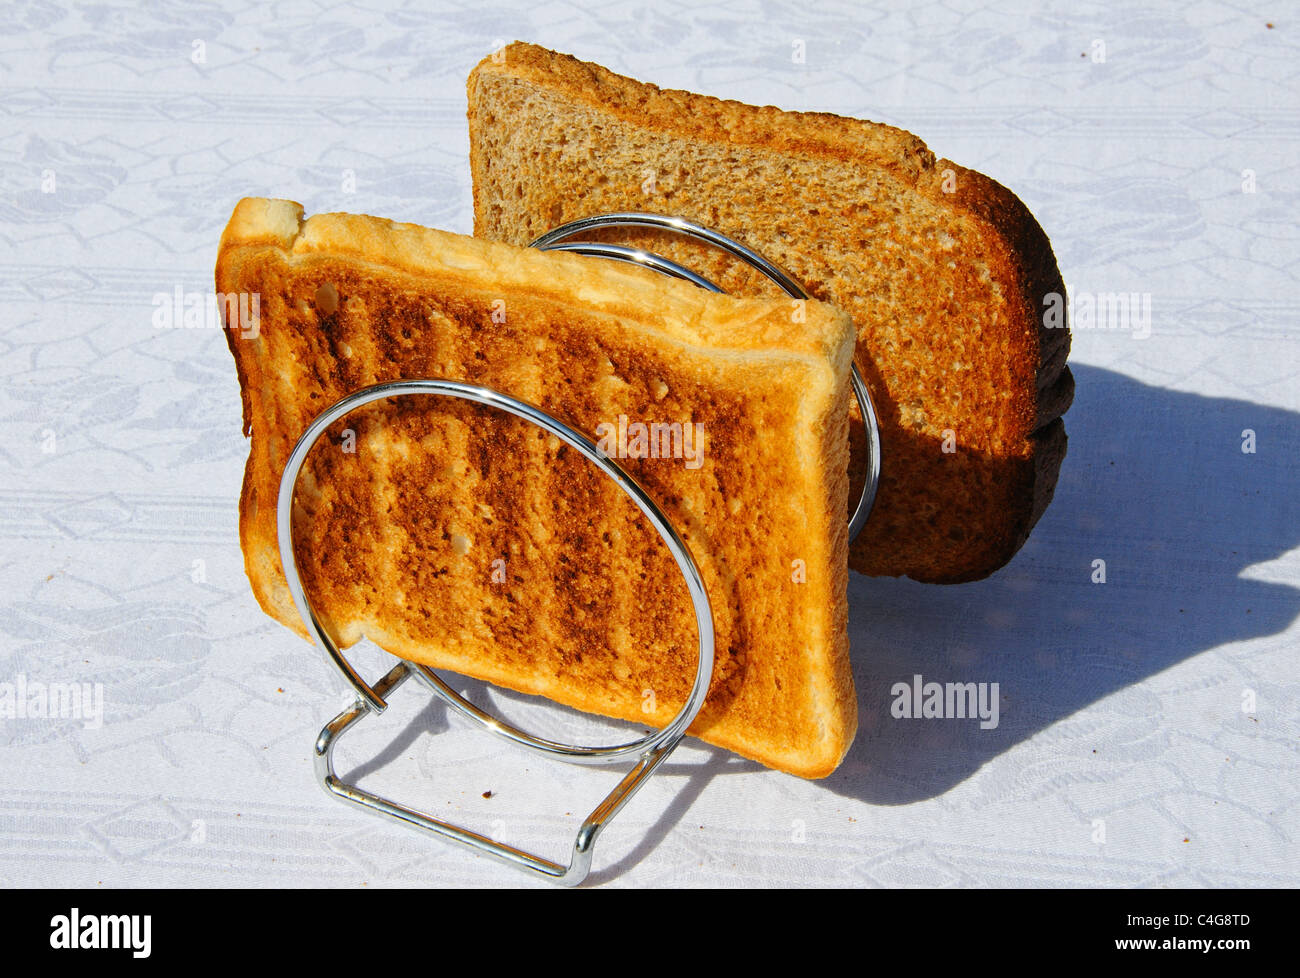 https://c8.alamy.com/comp/C4G8TD/two-slices-of-toast-in-a-chrome-coiled-toast-rack-C4G8TD.jpg